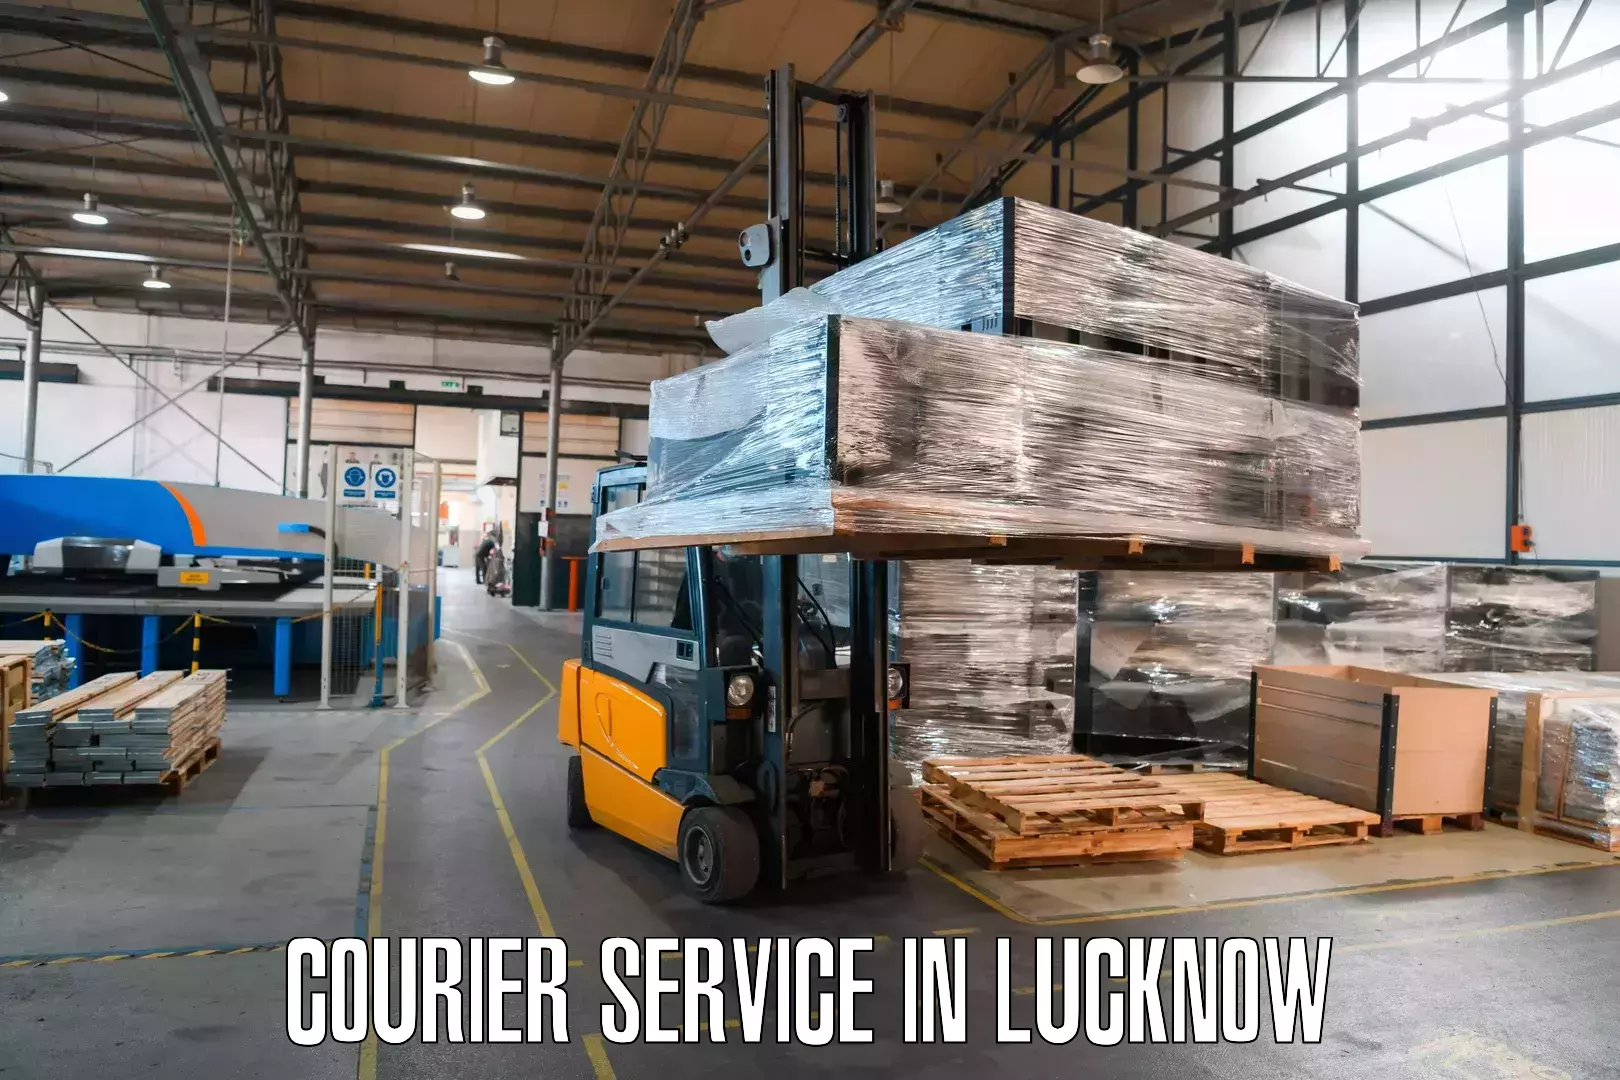 Courier service partnerships in Lucknow